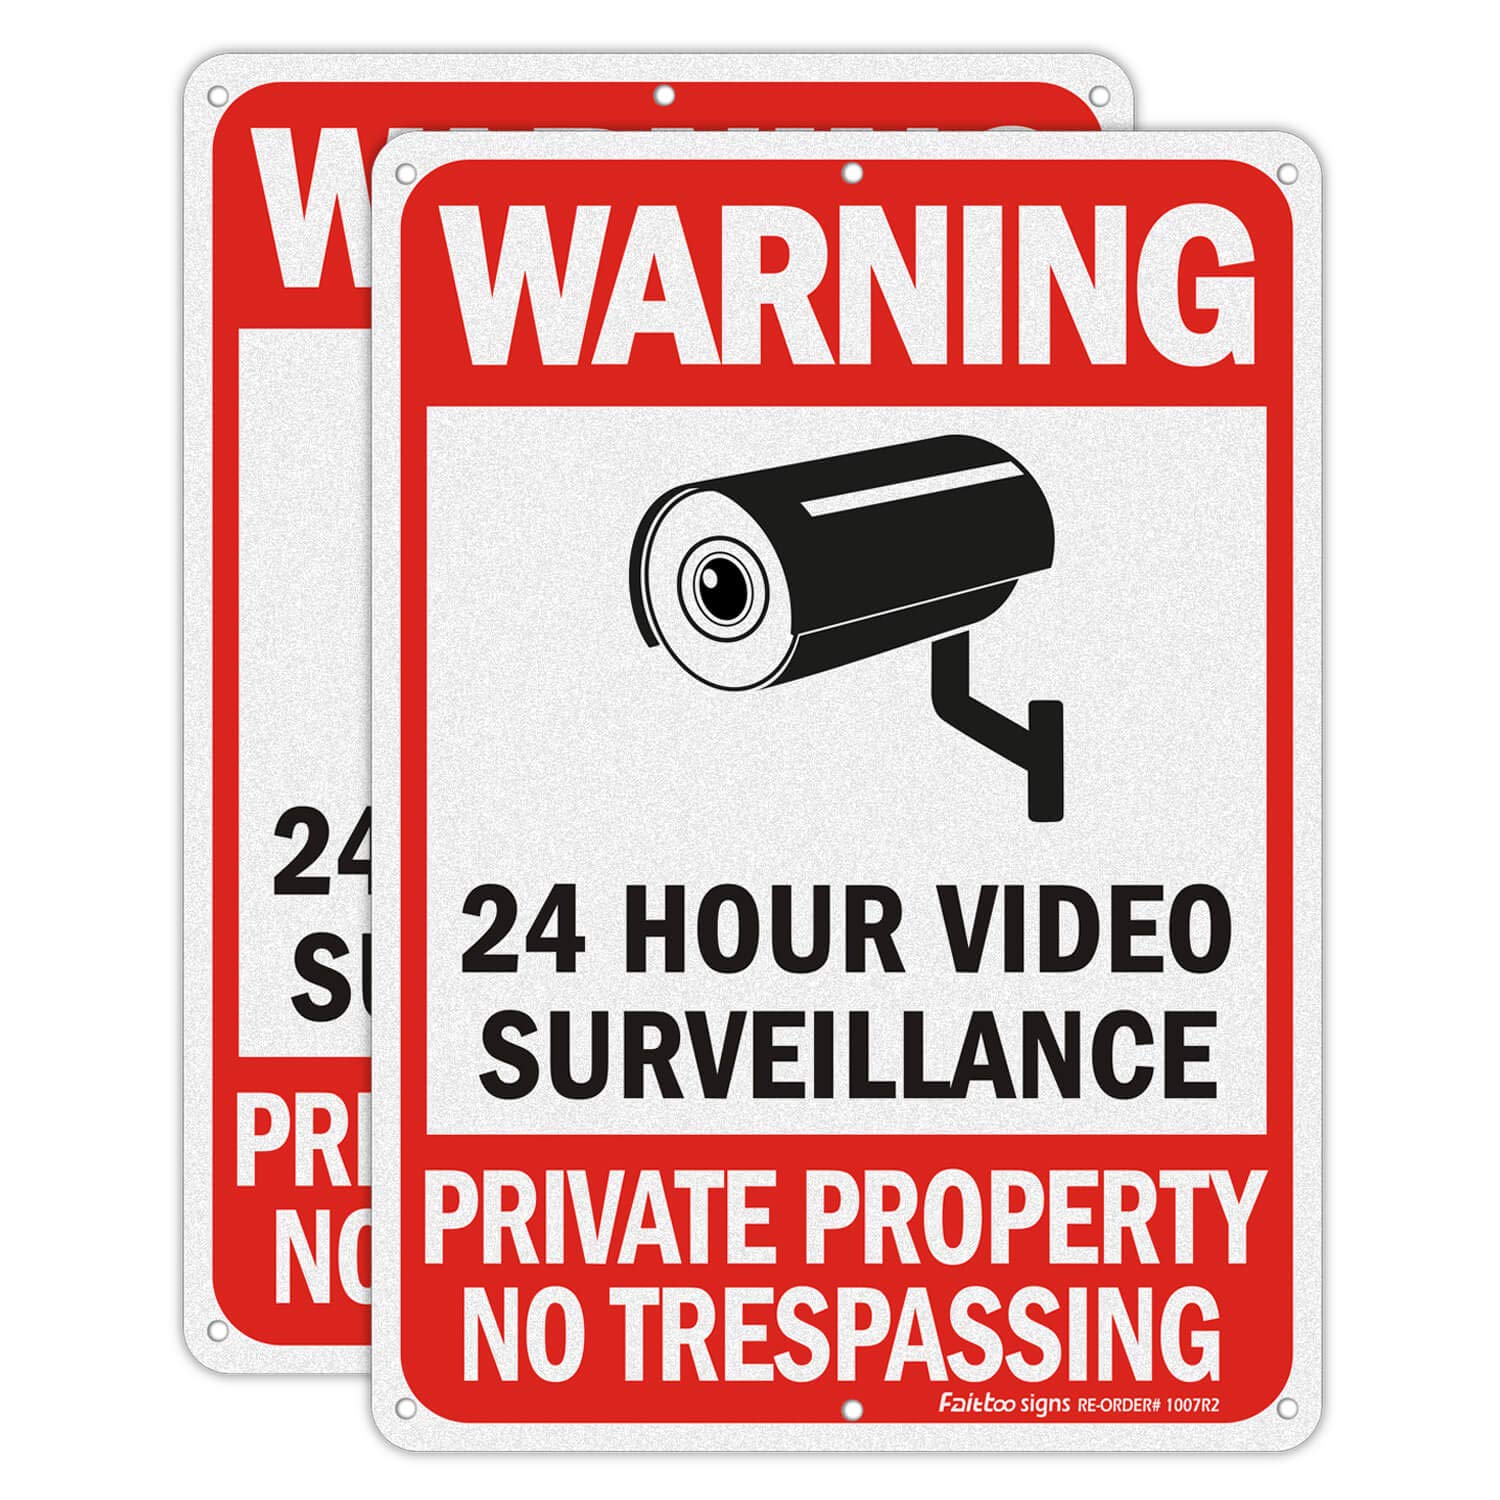 No Trespassing Signs, Private Property Sign, Warning Sign, Video Surveillance Sign, 2 Pack 10 x 7 Inches 0.40 Reflective Aluminum, UV Protected, Weather Resistant, Durable Ink, Easy to Mount